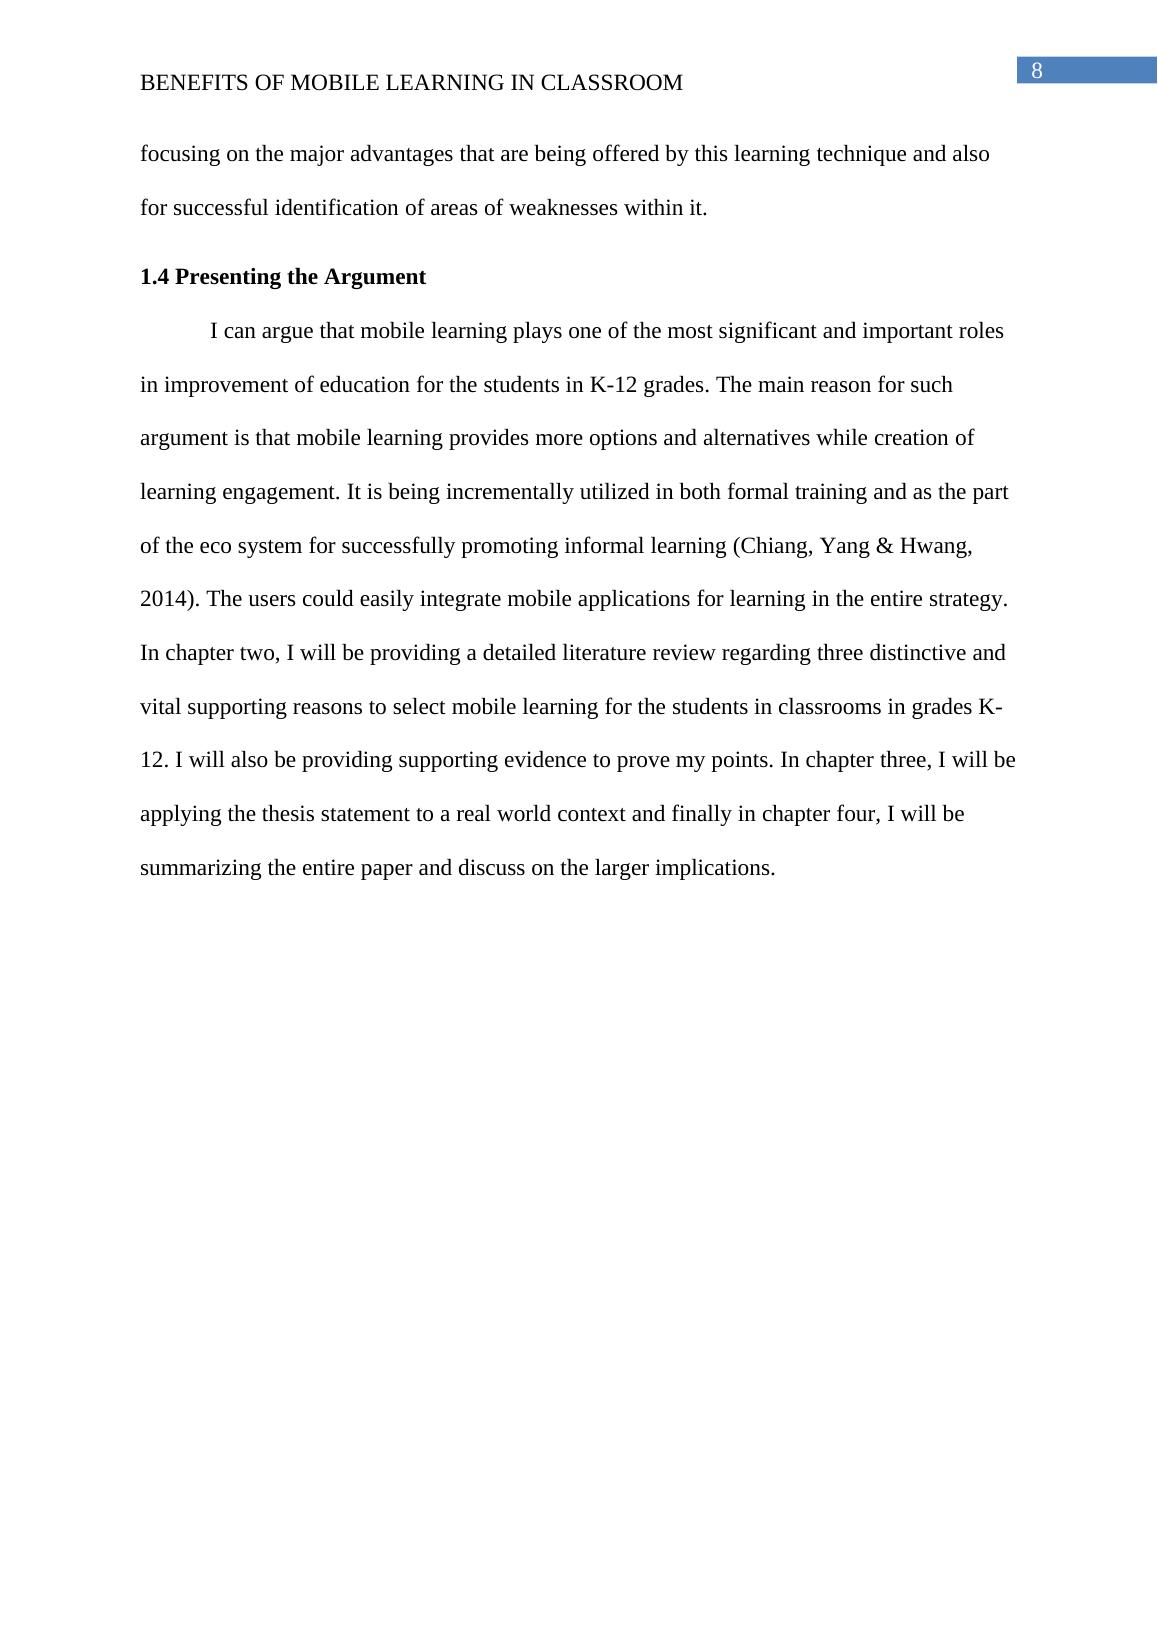 The objective of this thesis paper is to set in the content of mobile learning benefits_8